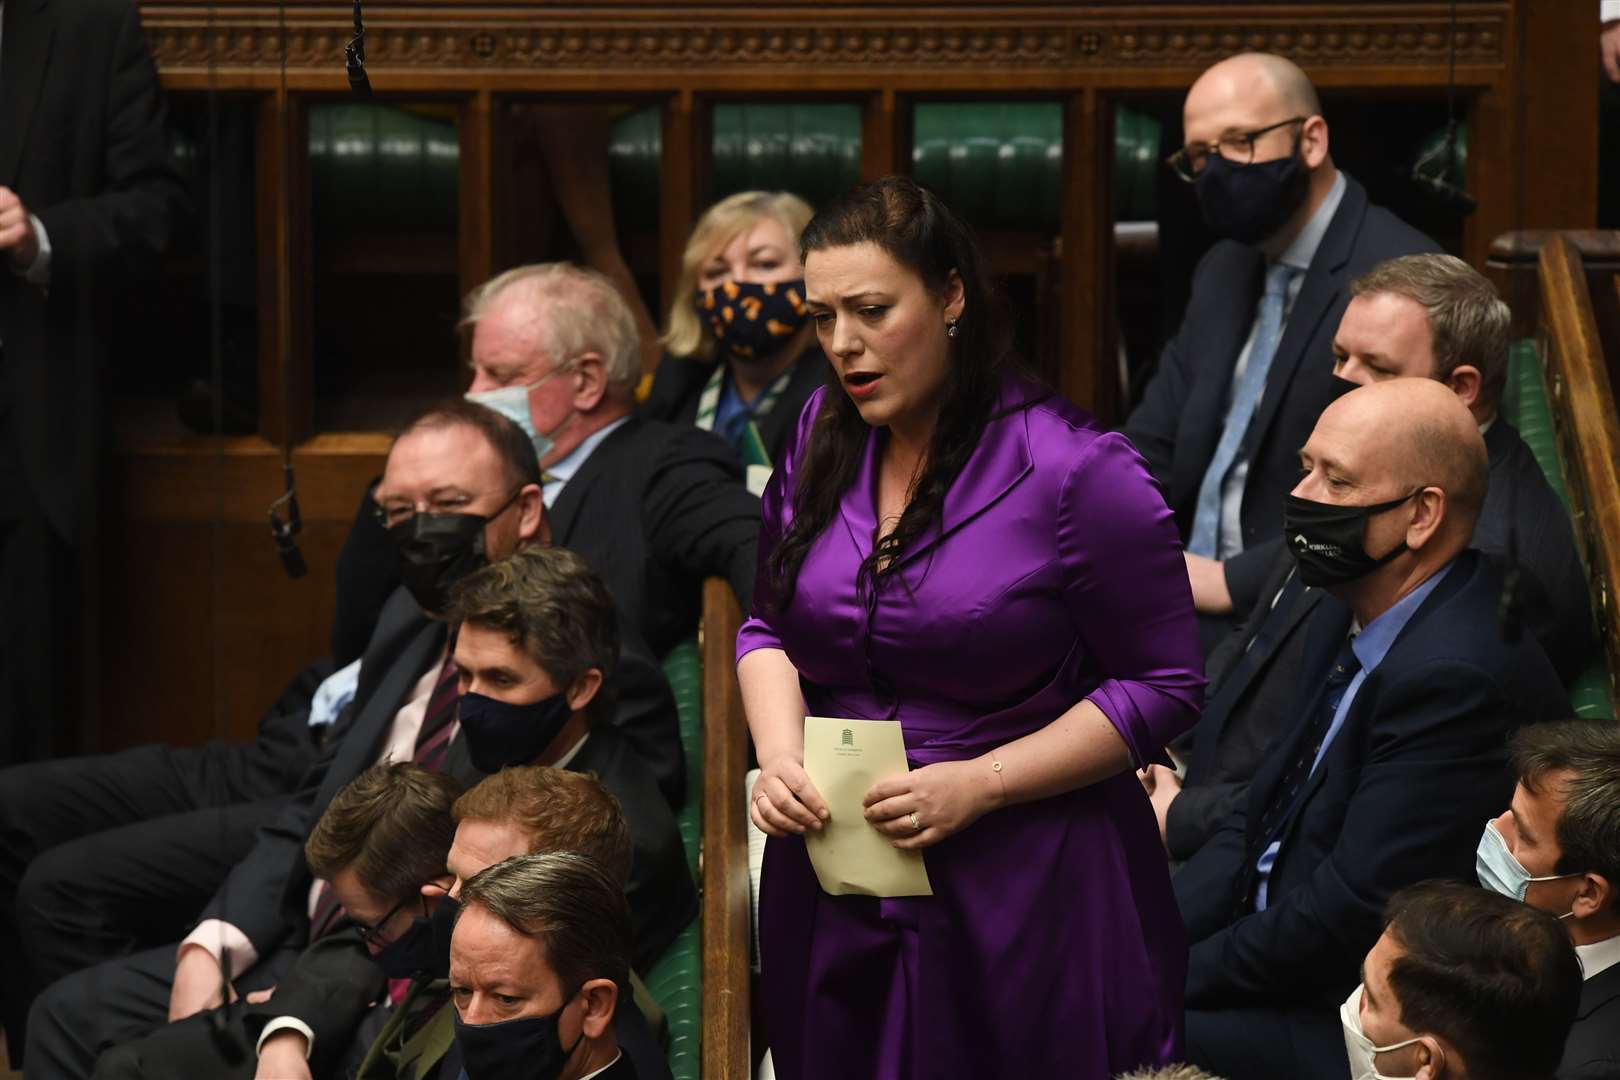 Tory MP Alicia Kearns said she thought the PM had misled Parliament when he said Covid rules were upheld in No 10 (UK Parliament/Jessica Taylor/PA)